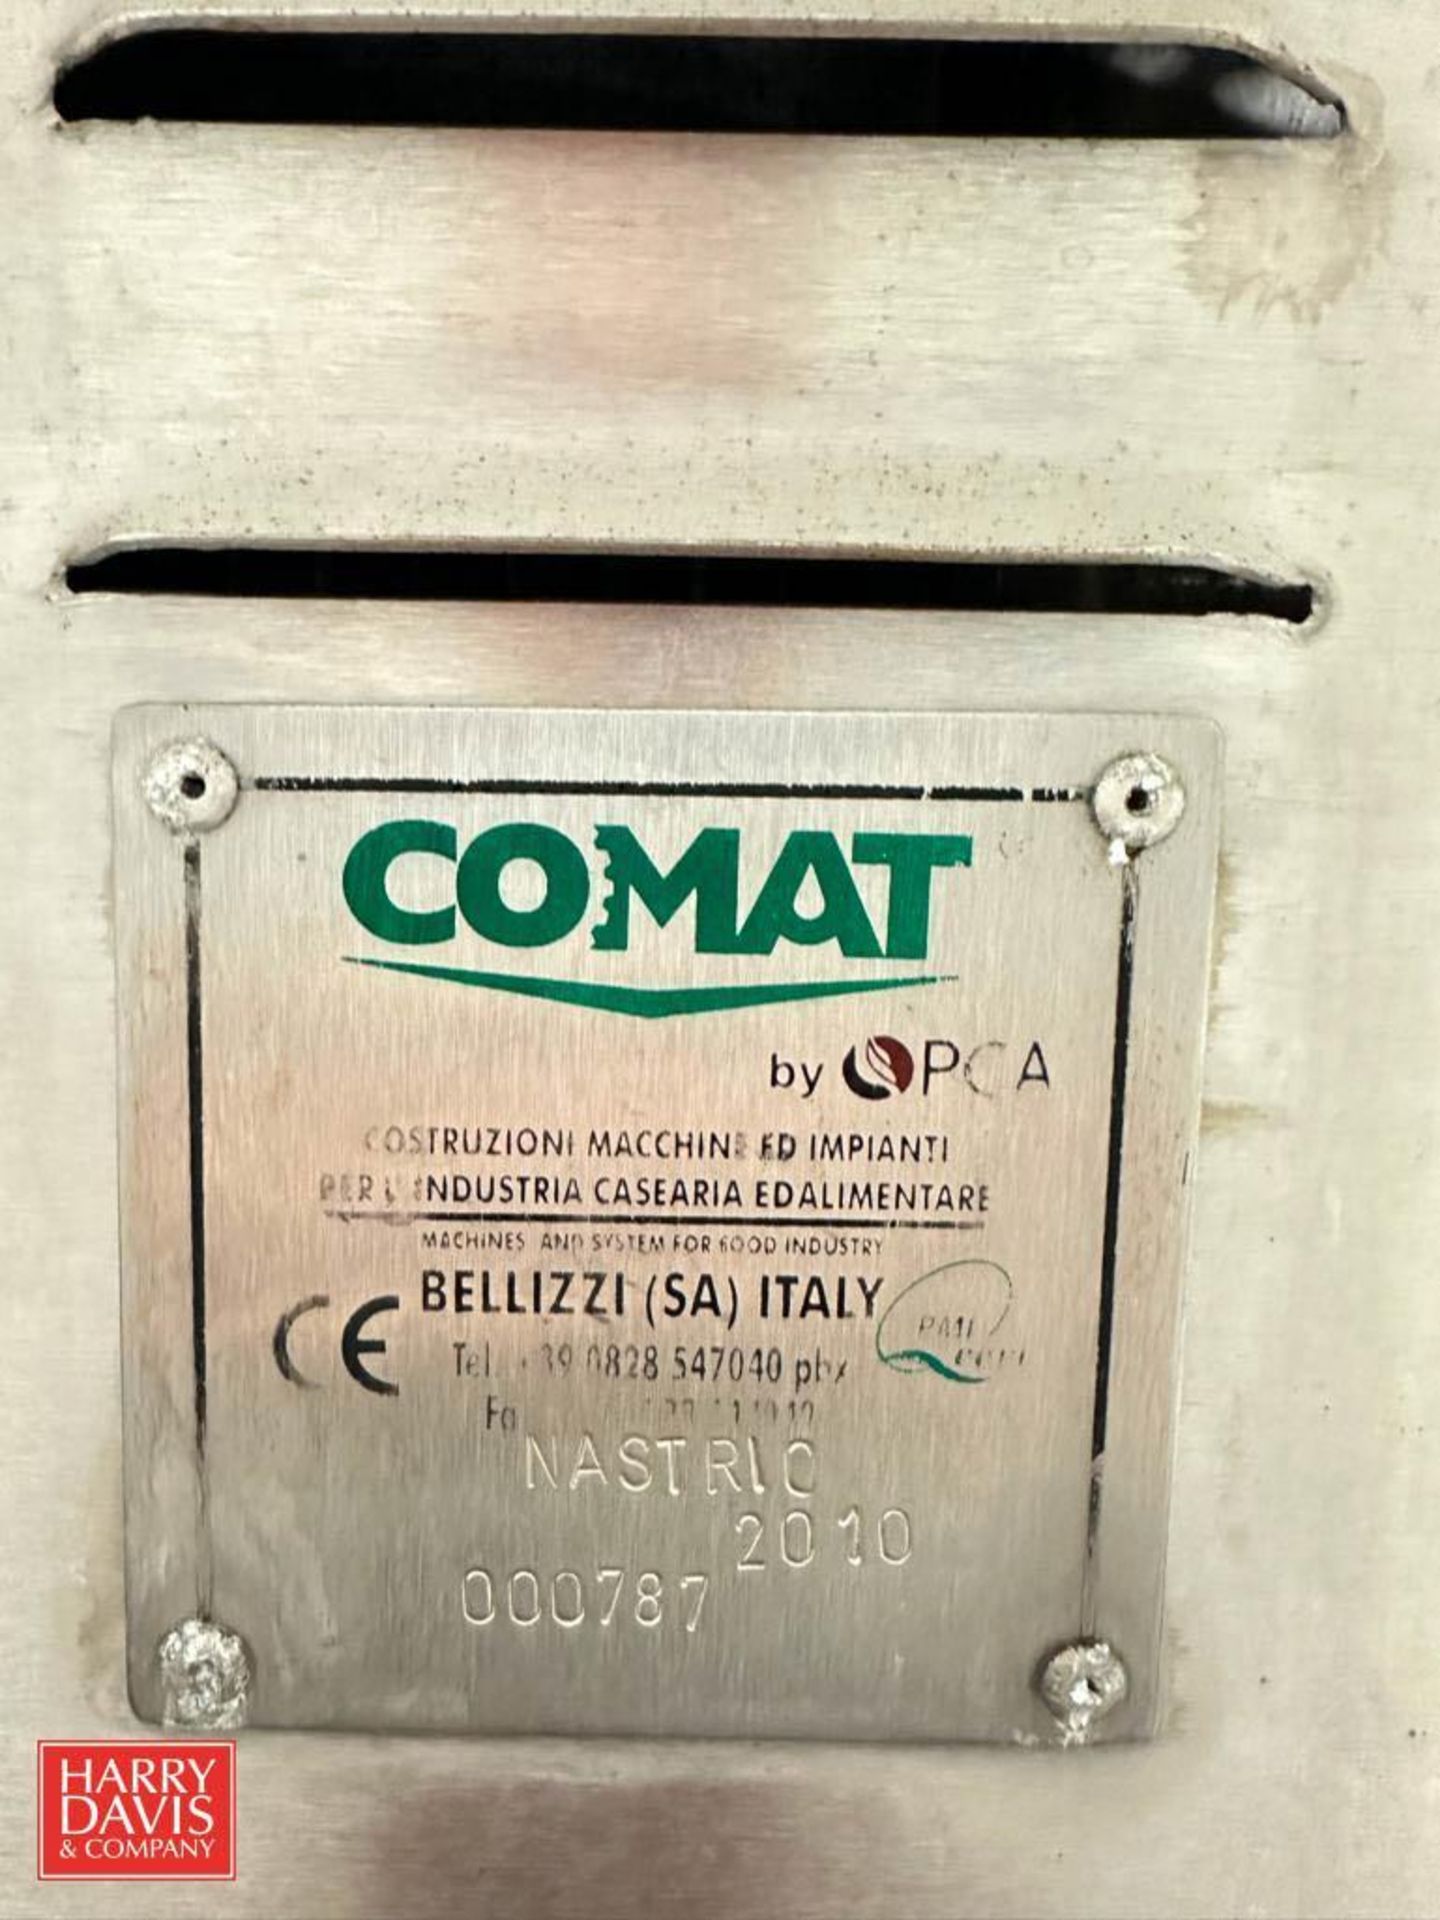 Comat S/S Flocculation Ricotta Drainage Belt, Model: Nastric, S/N: 000787 with Pump, Valves and Belt - Image 3 of 4